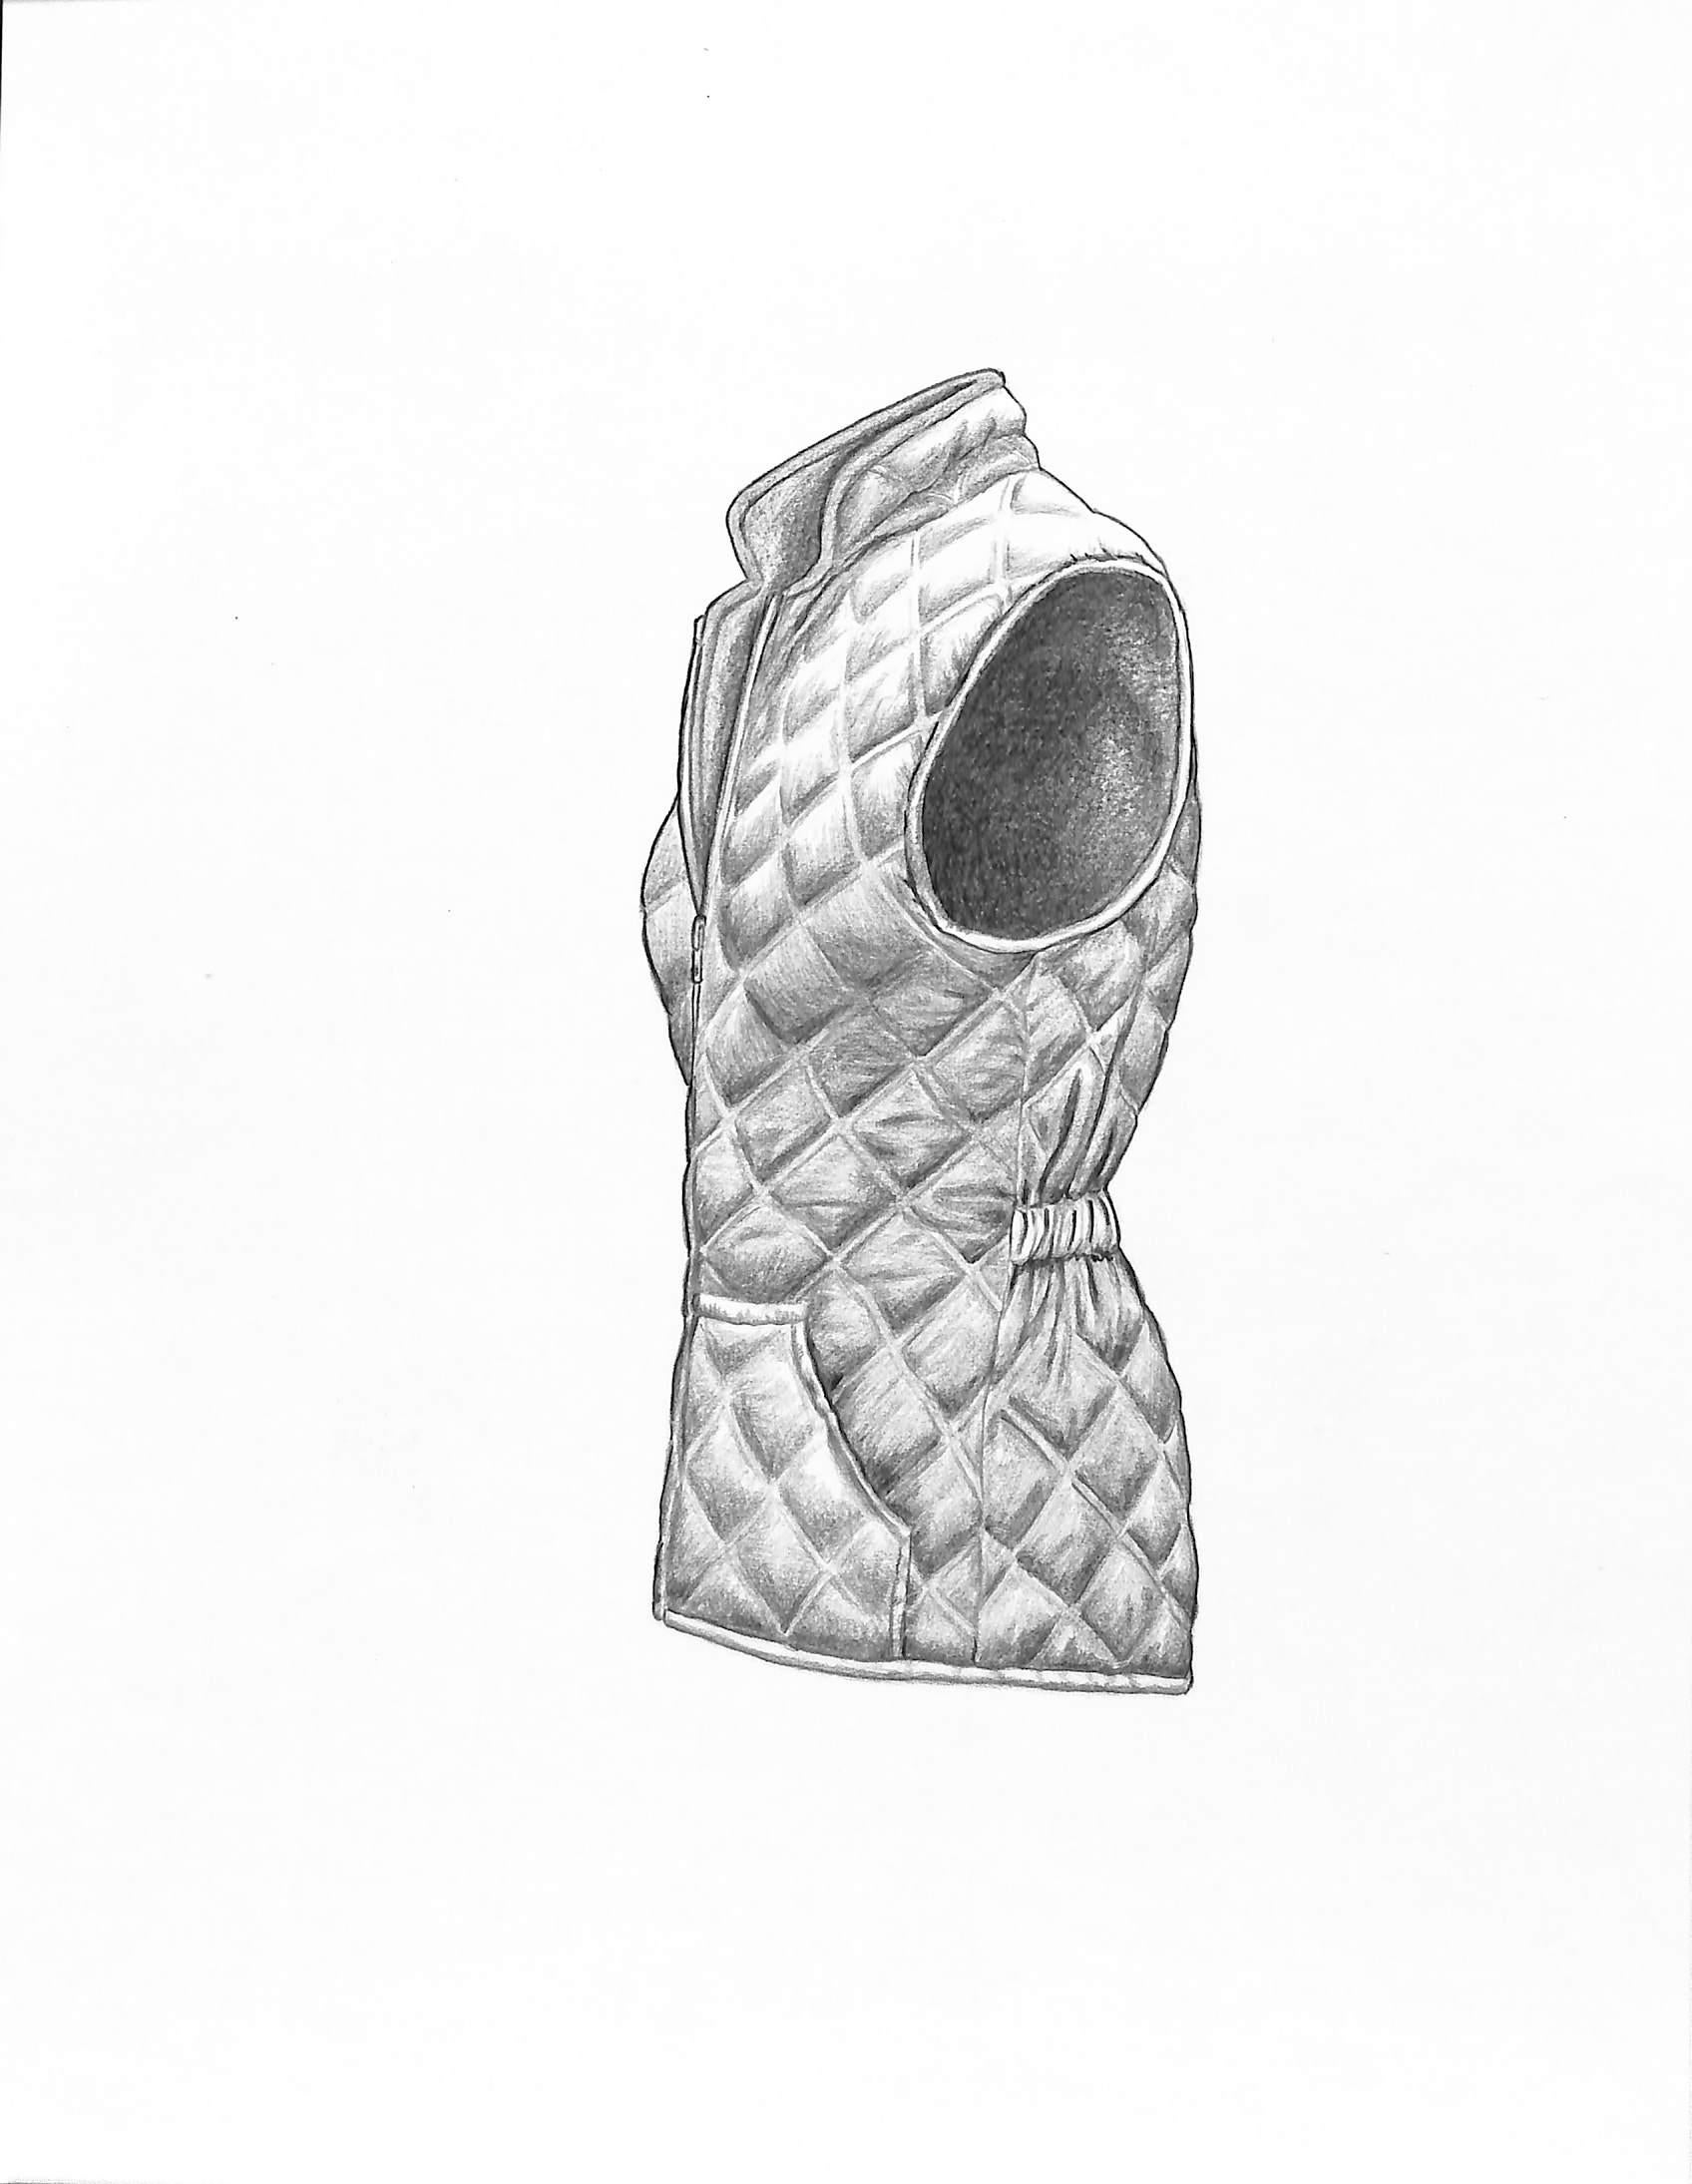 Quilt Vest 1998 Graphite Drawing - Art by Unknown